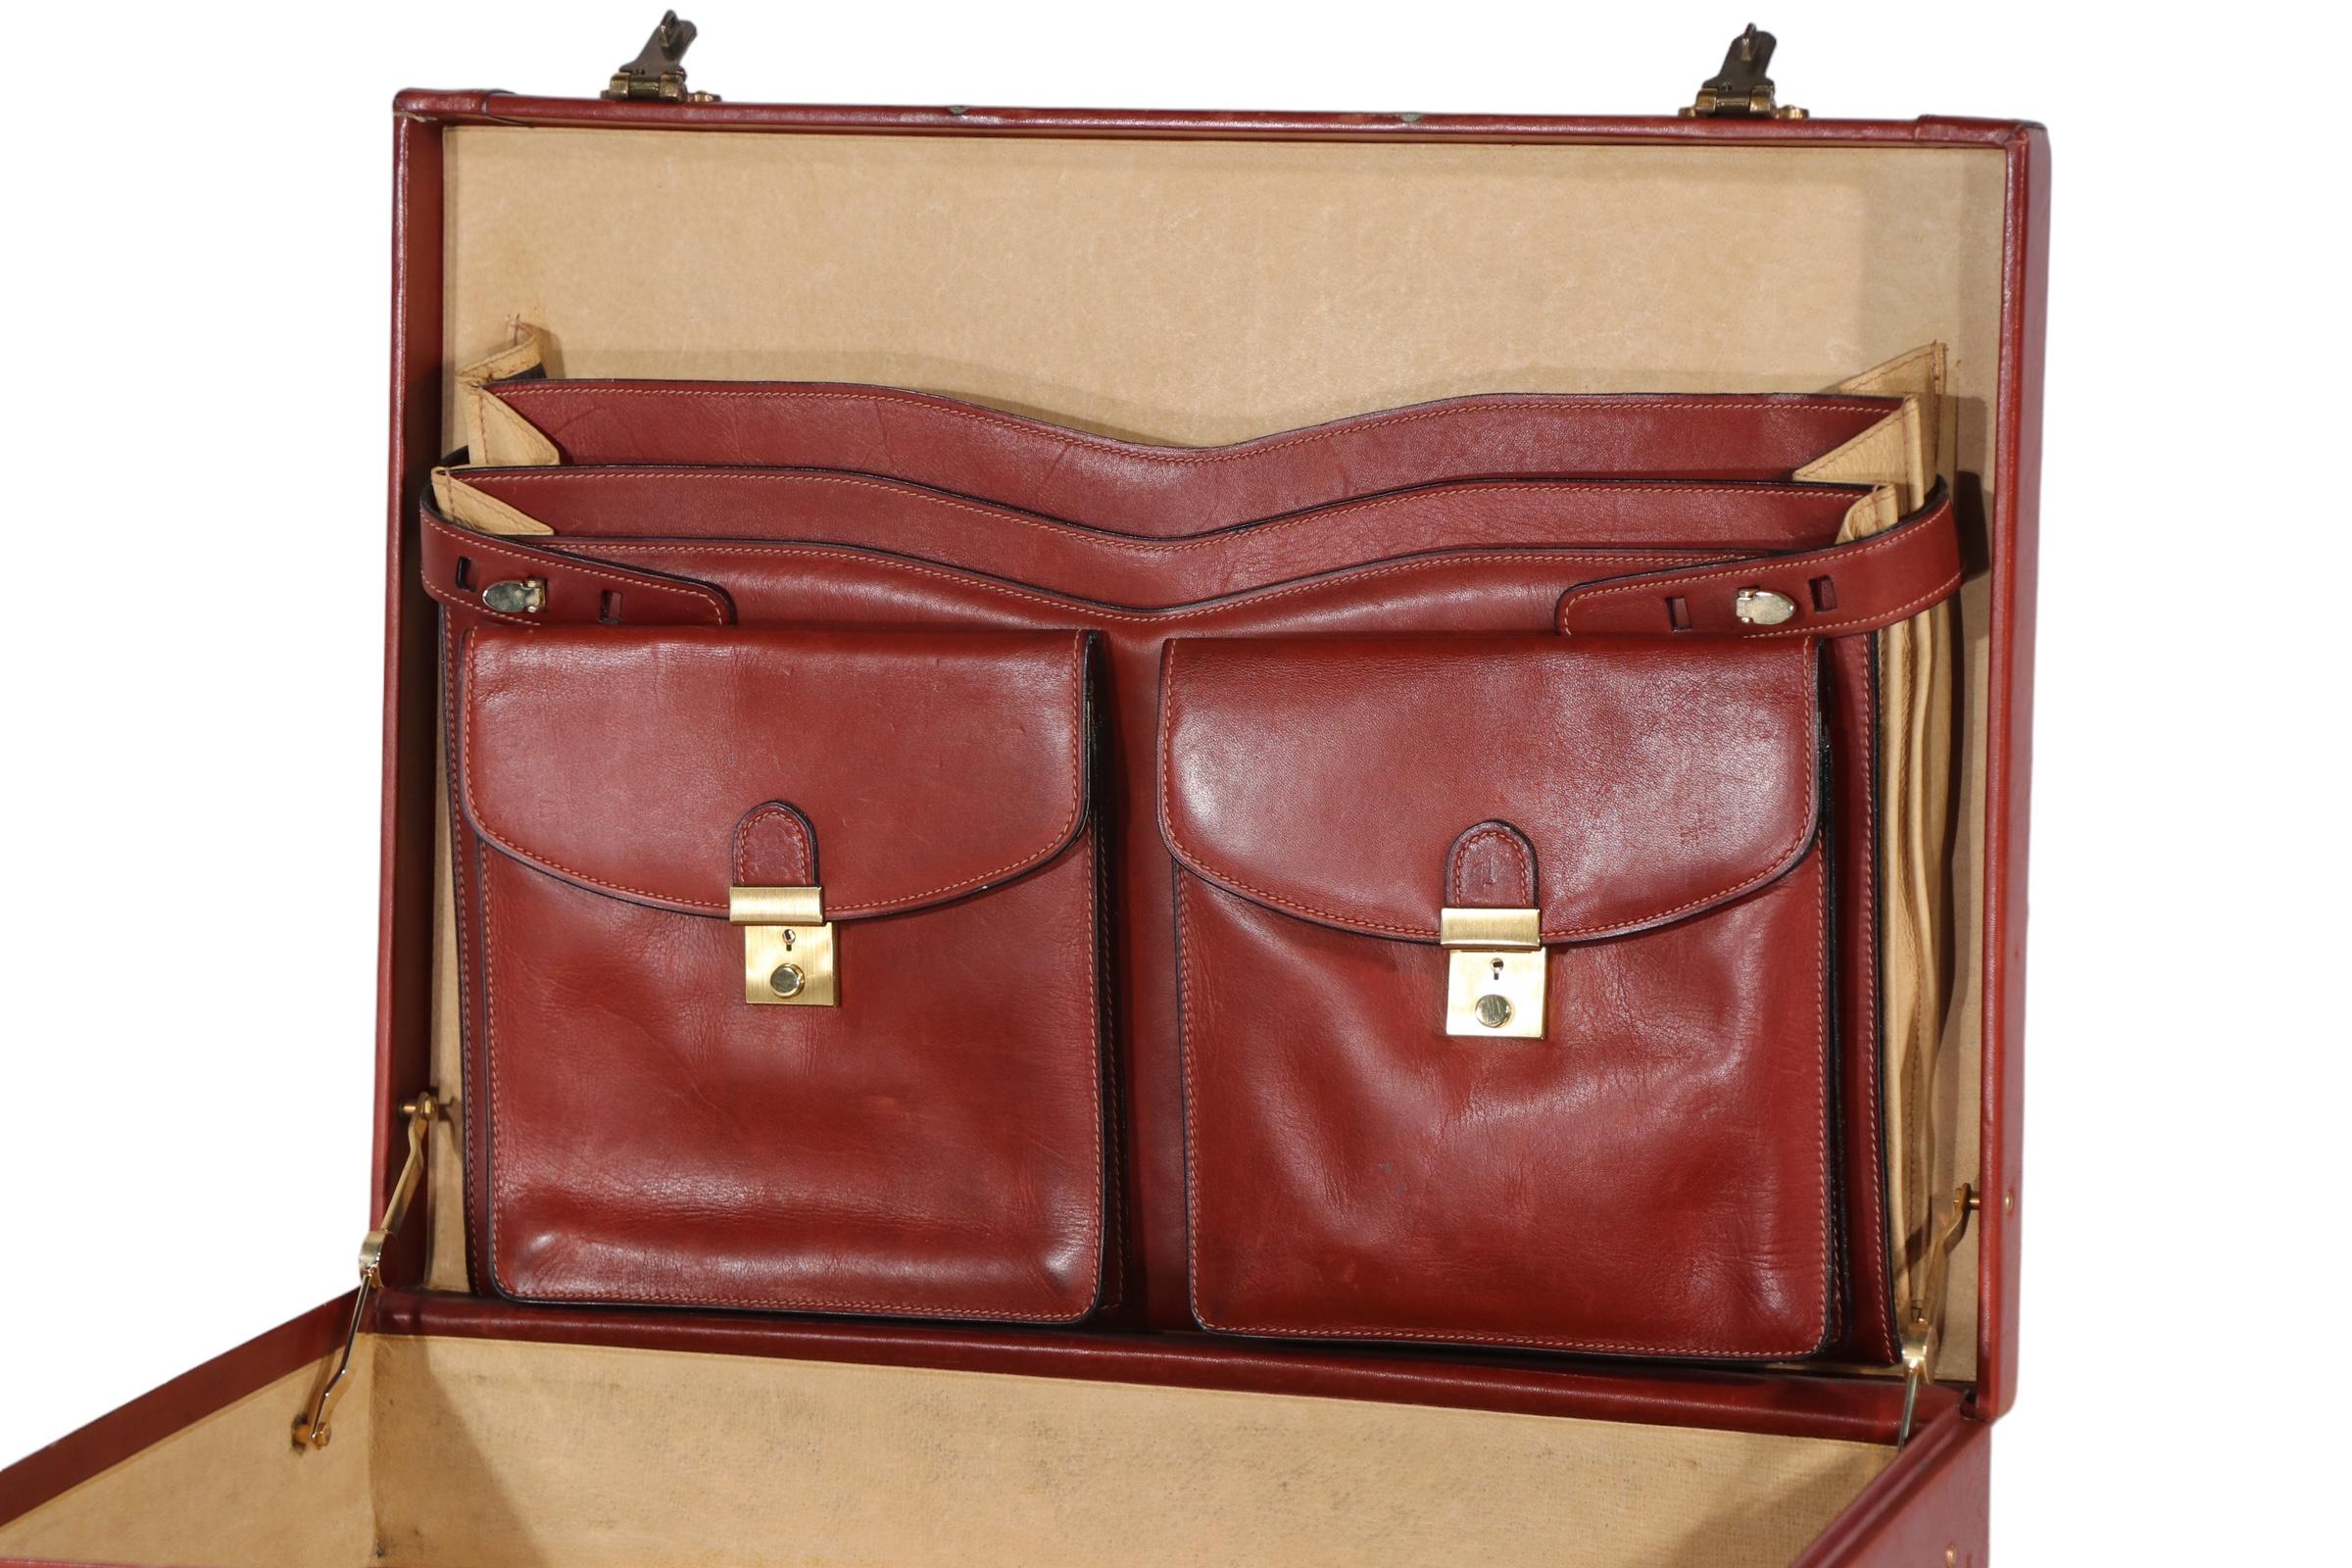  Mid Century Art Deco Hard Case Leather Attache Briefcase  after Bally, Hermes  For Sale 8